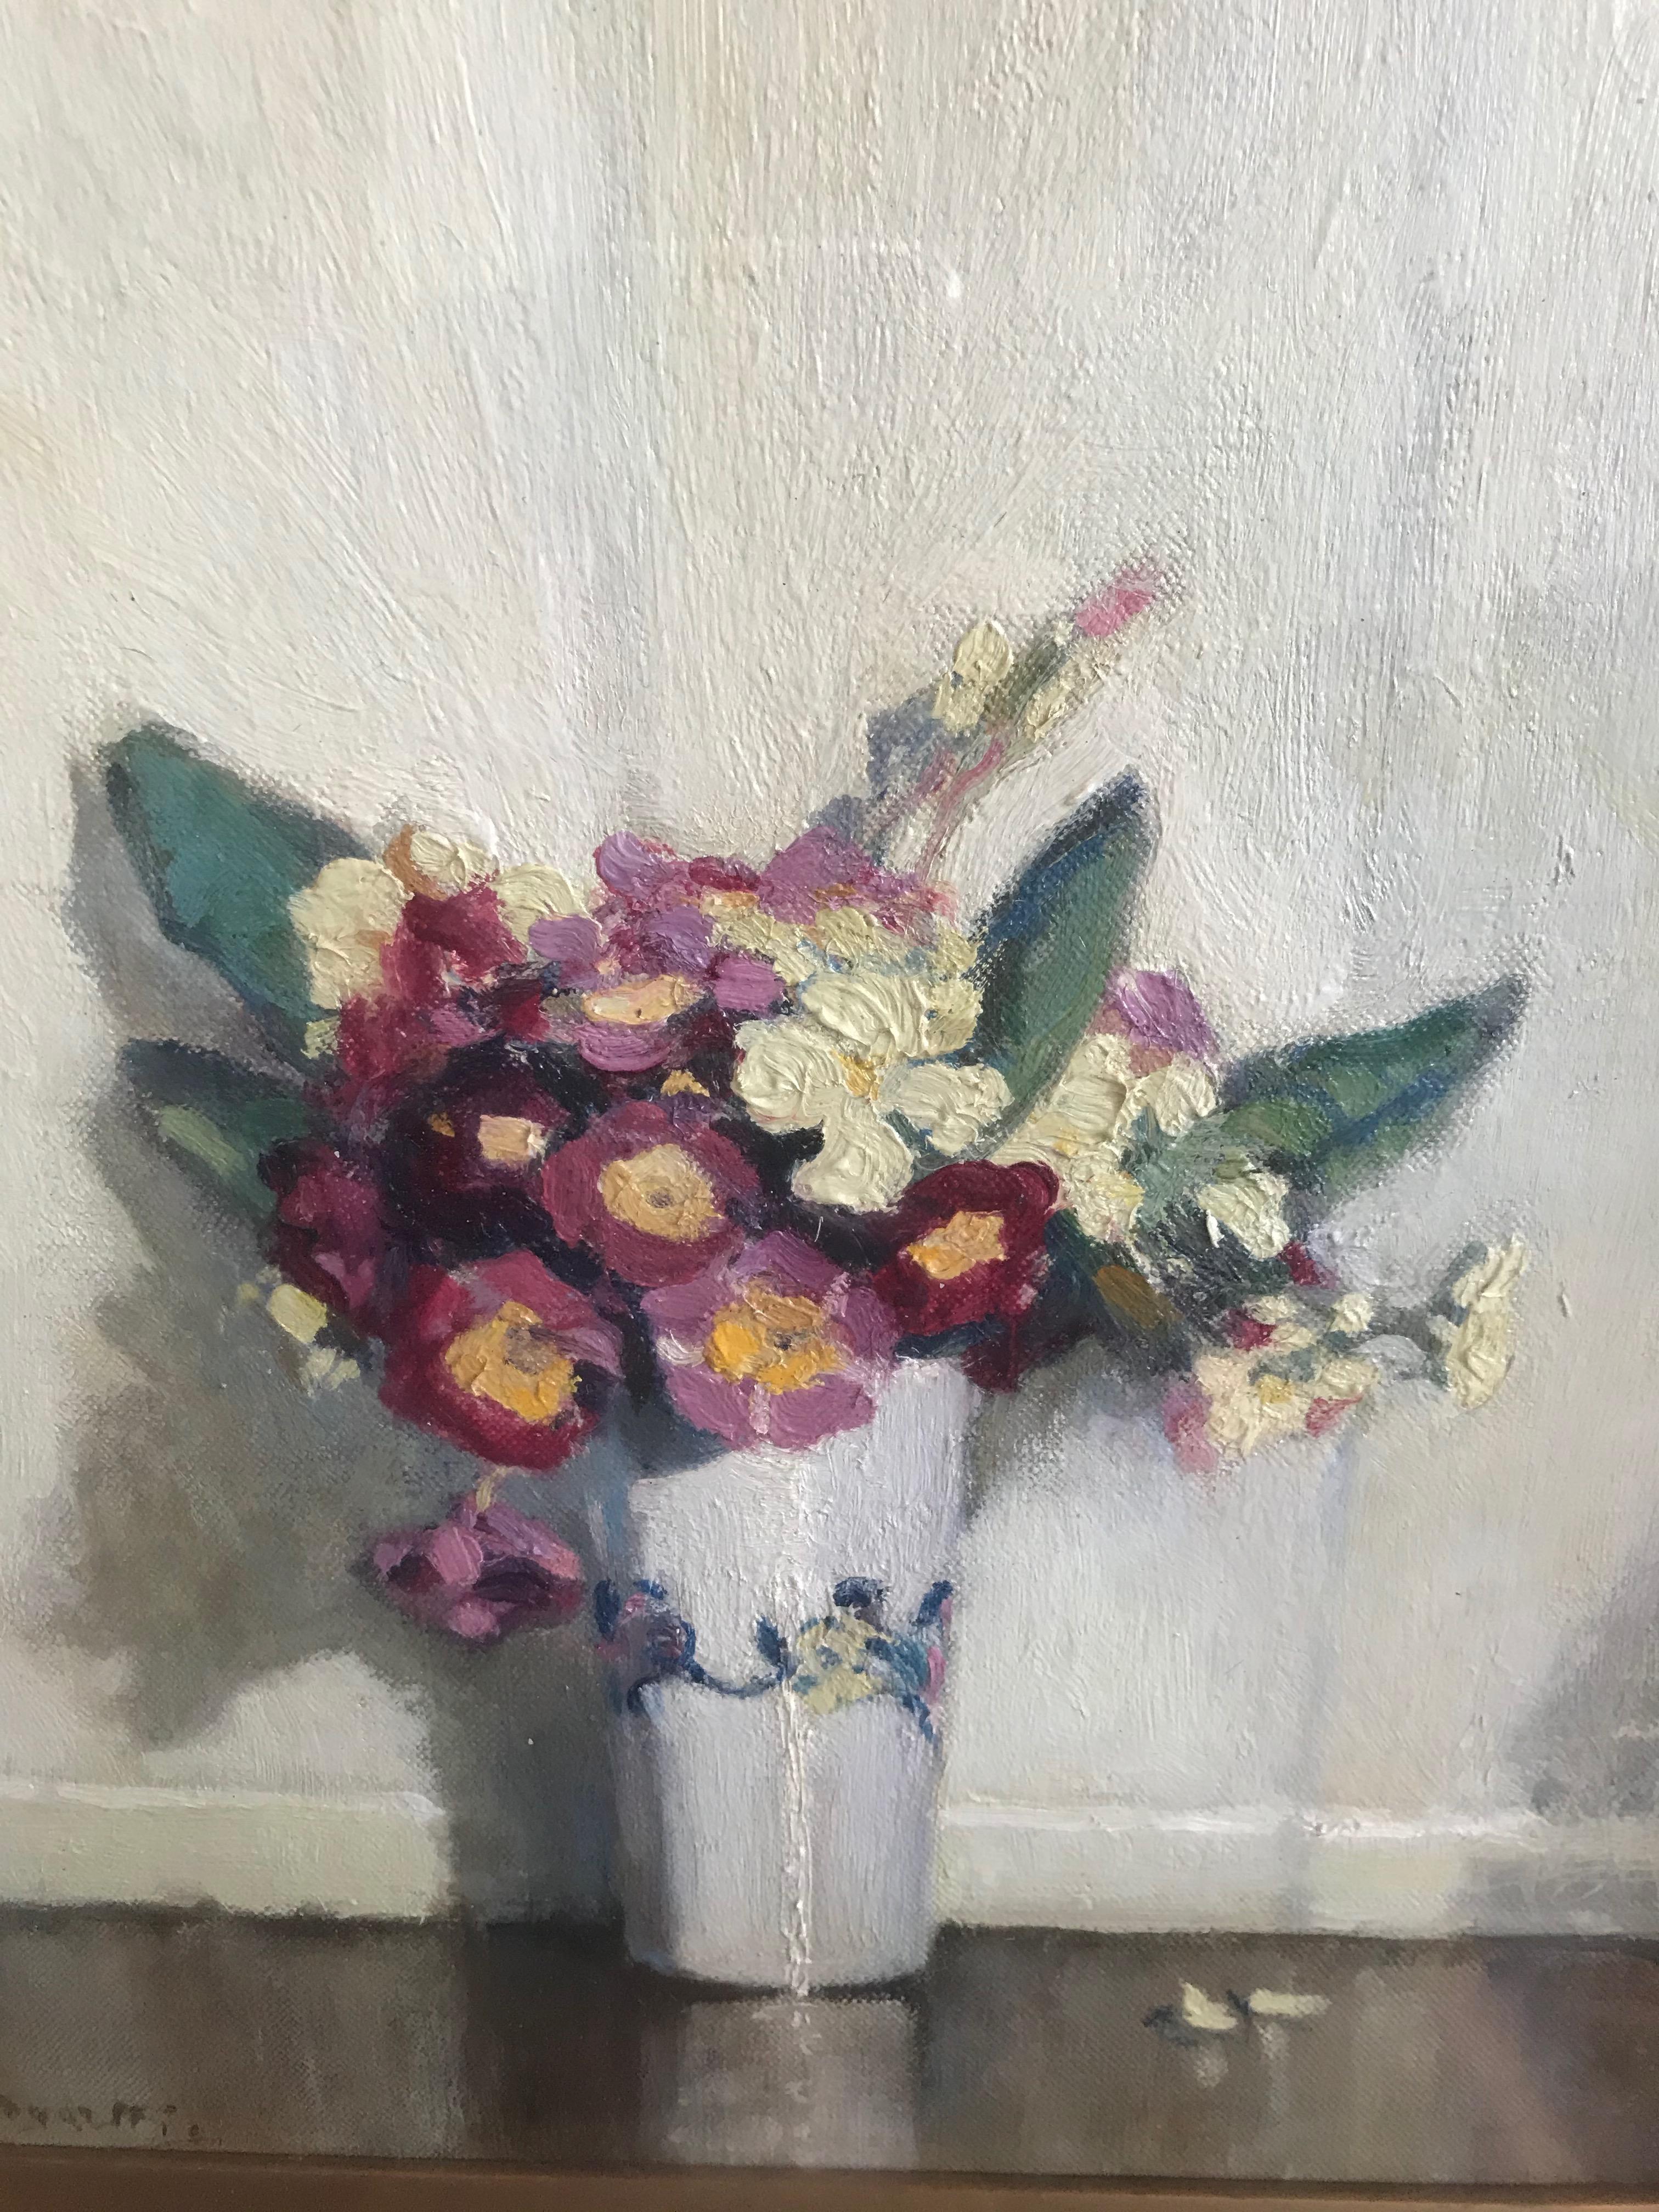 Lizzie Hogarth (1879-1953)
Still life of primulas in a vase,
signed,
oil on canvas,
15 x 11 inches

This beautifully presented still life brings to mind the work of Sir William Nicholson with the skilful capture of reflections and the sparse